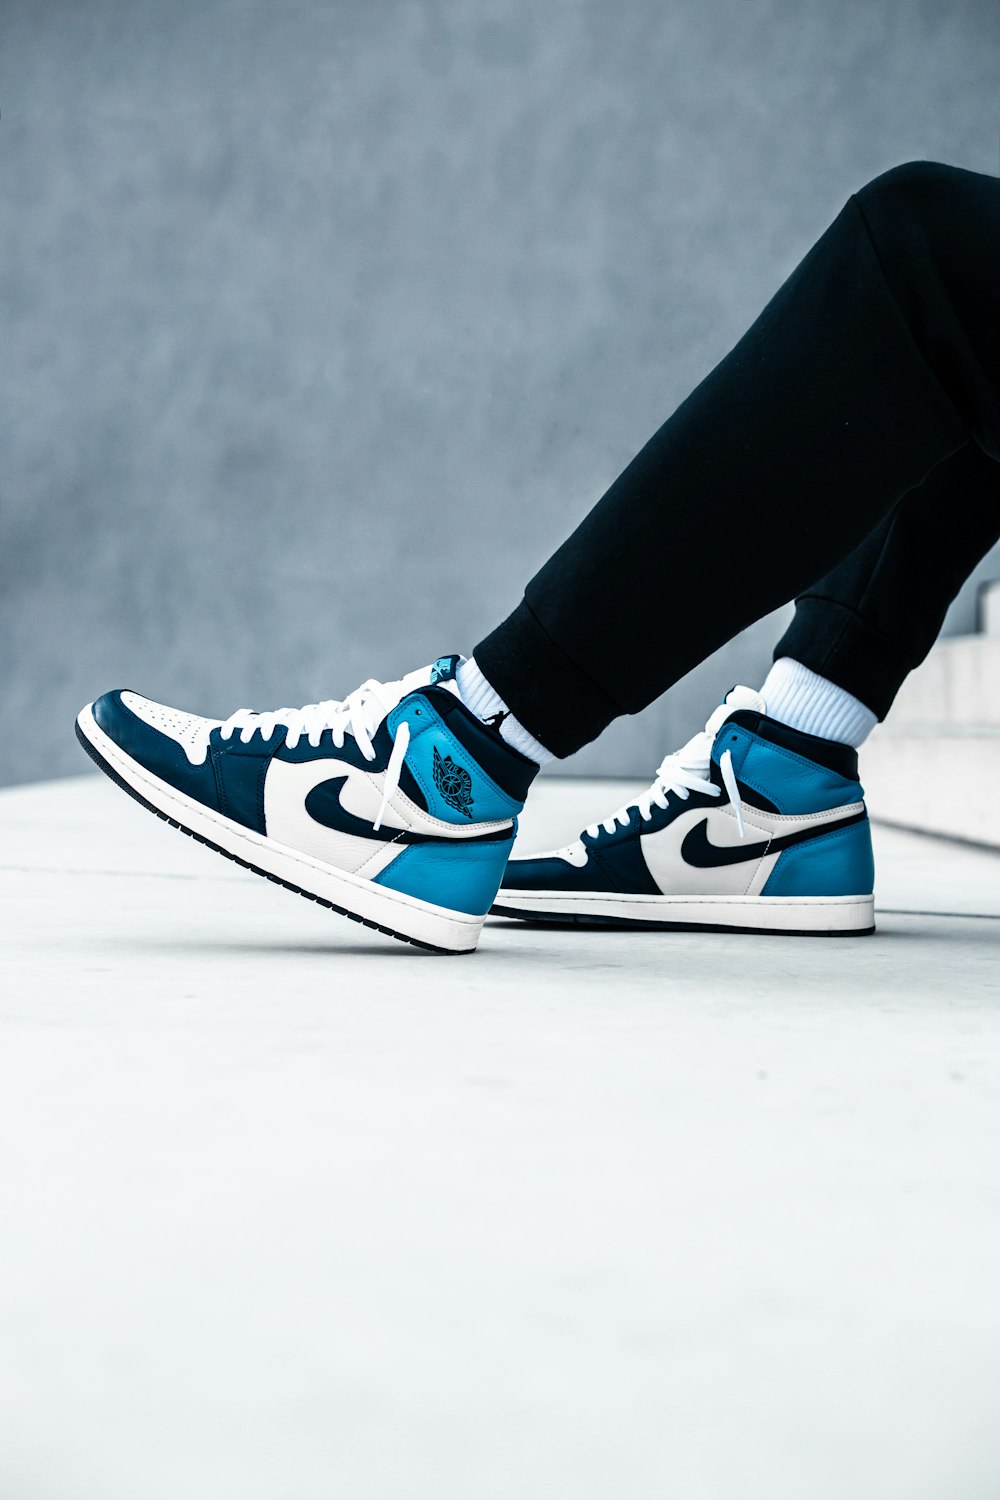 person wearing black pants and blue and white nike sneakers photo – Free  Bratislava Image on Unsplash